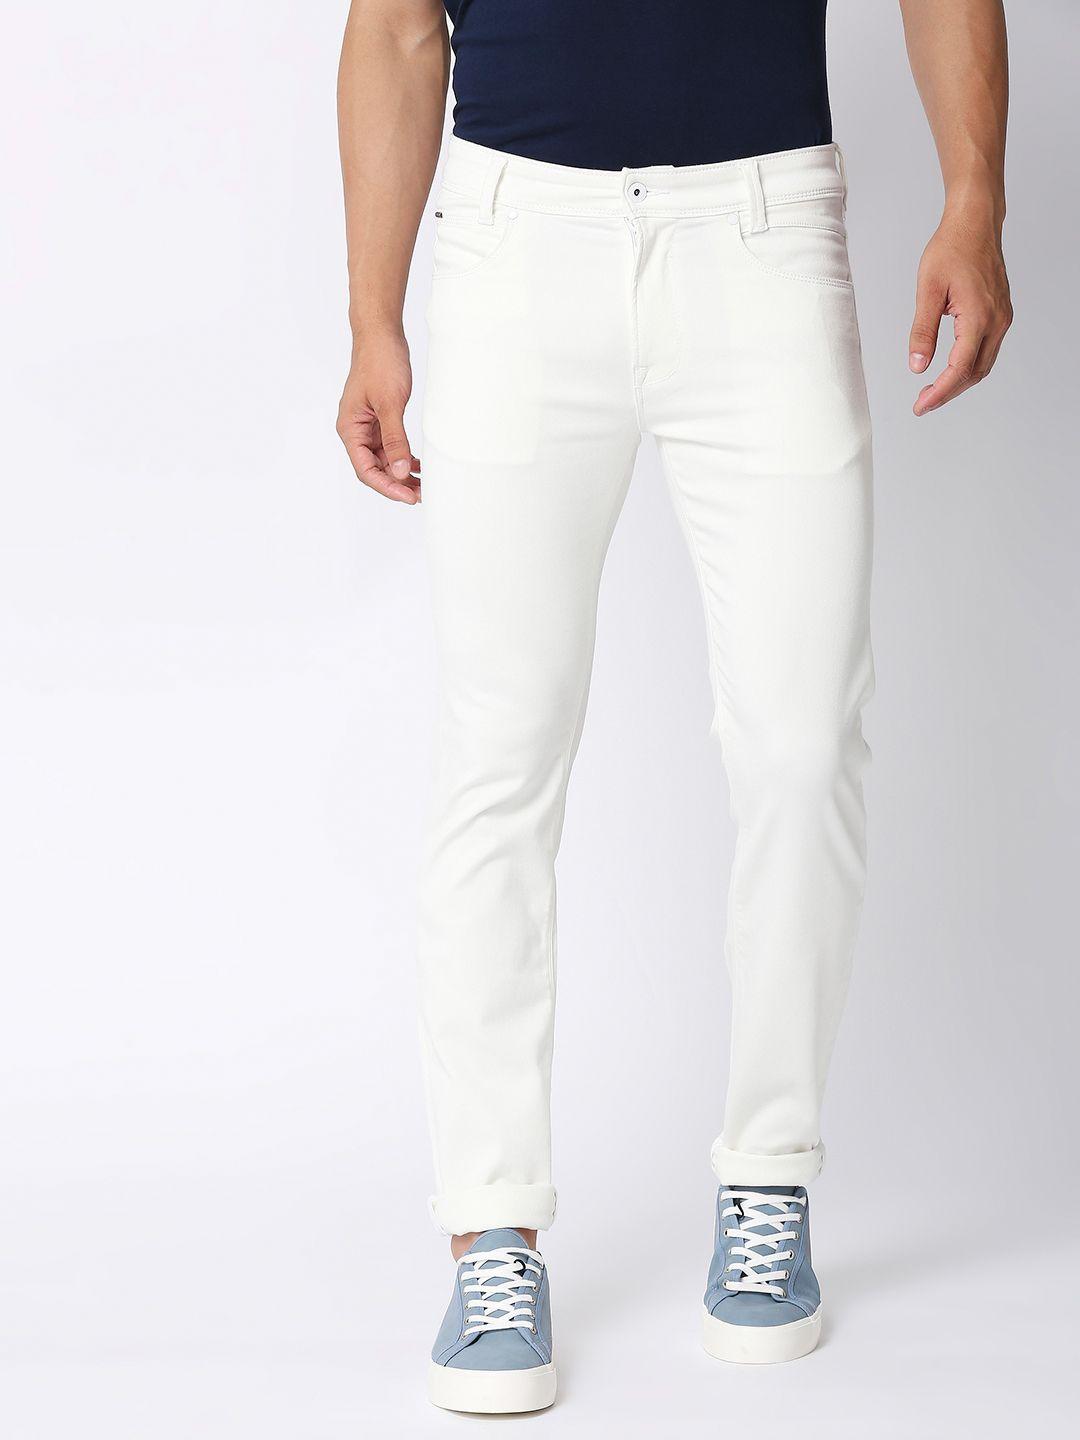 pepe jeans men white slim fit stretchable jeans